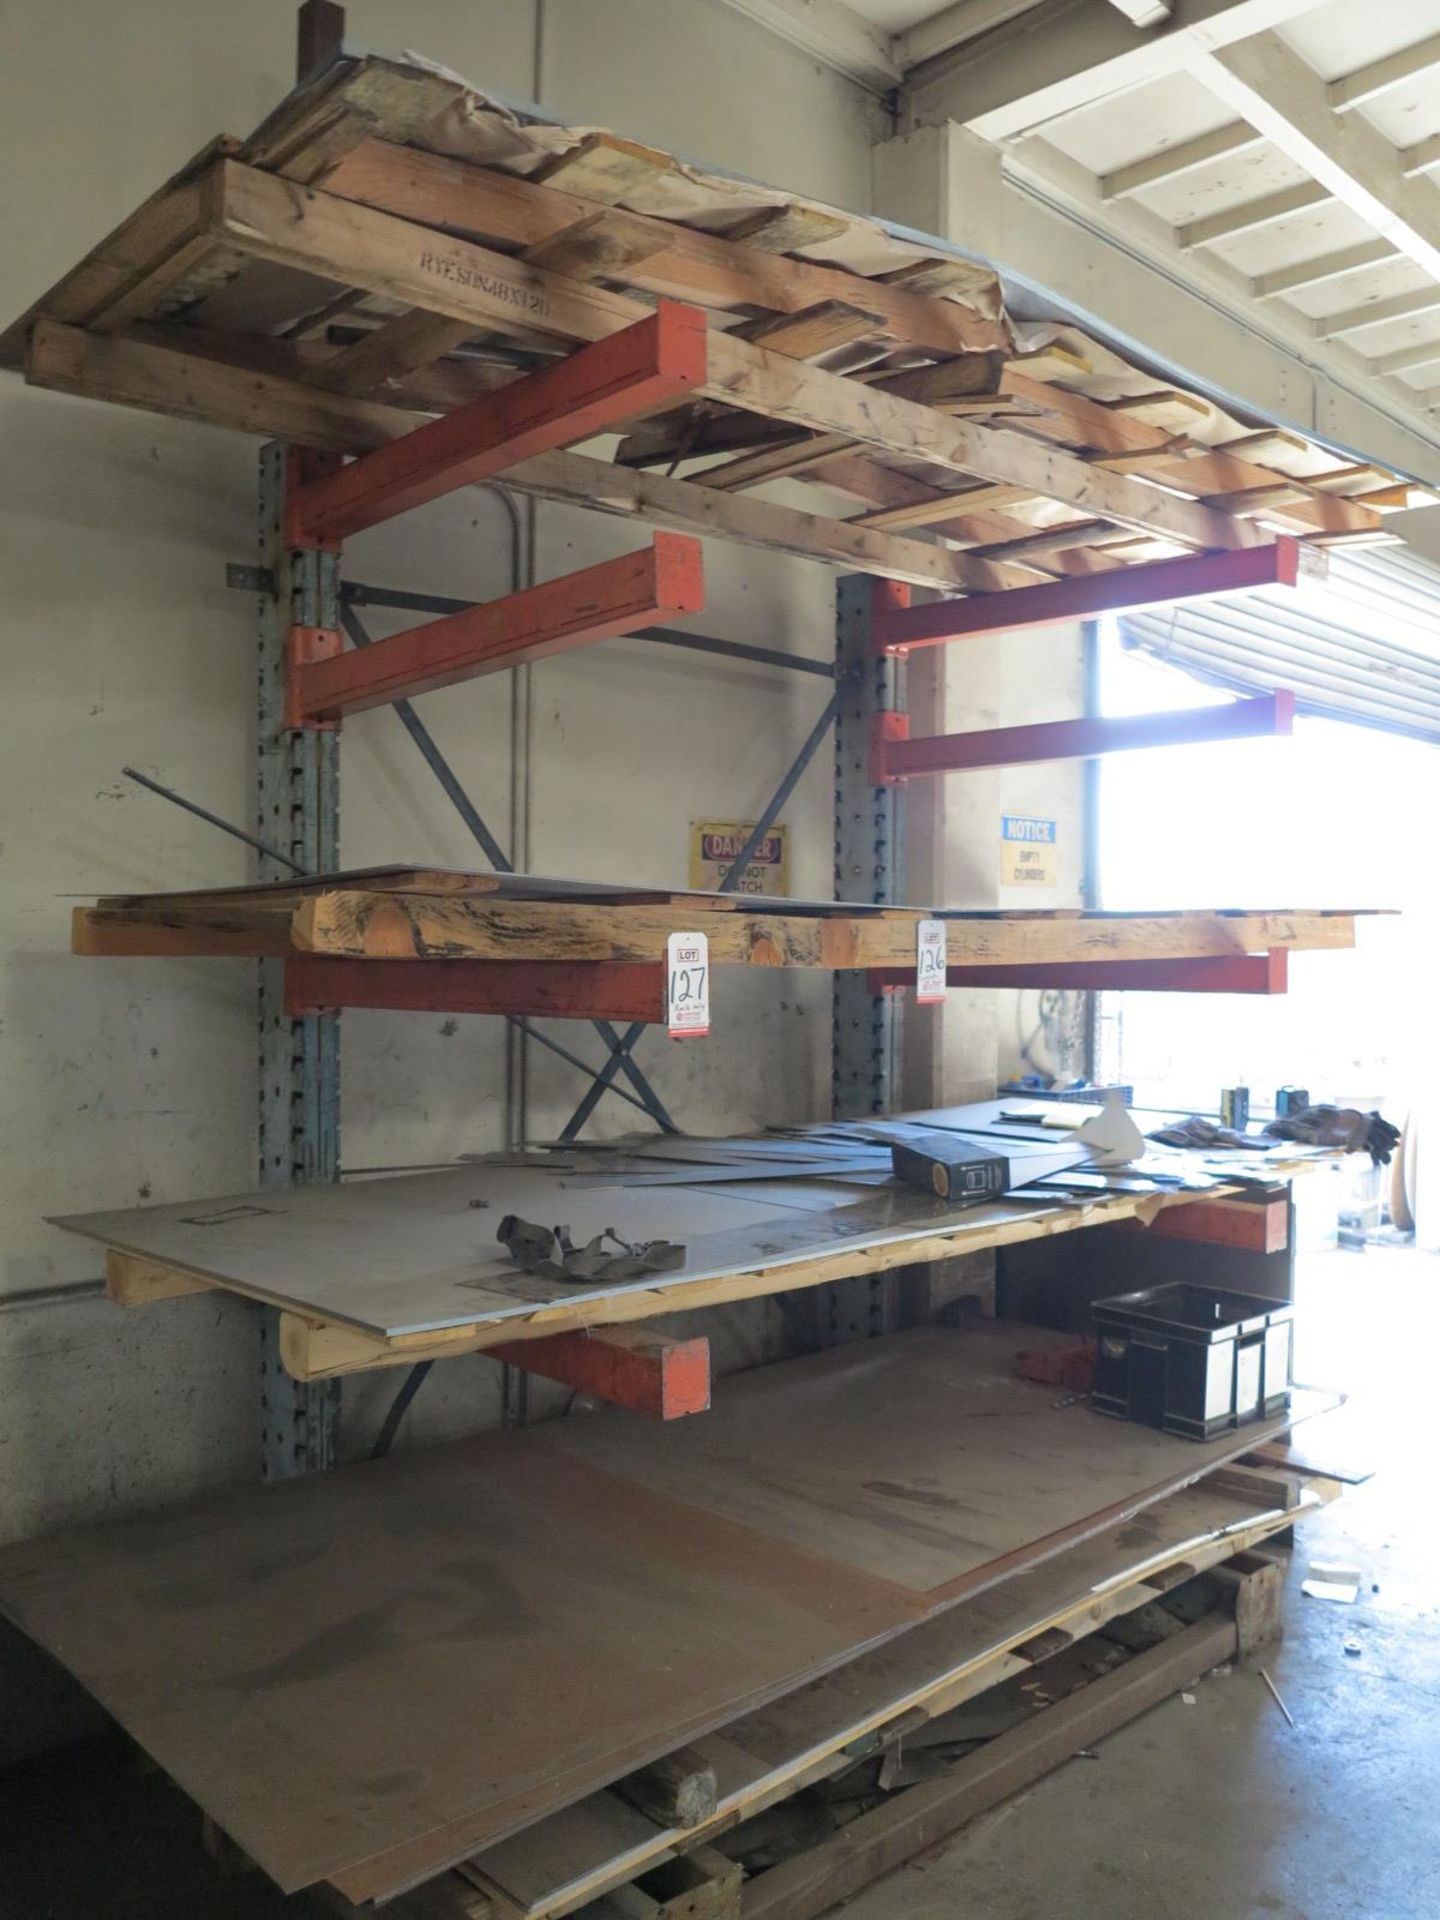 CANTILEVER RACK, 80"W X 9'H, 4' ARMS, CONTENTS NOT INCLUDED - Image 2 of 2